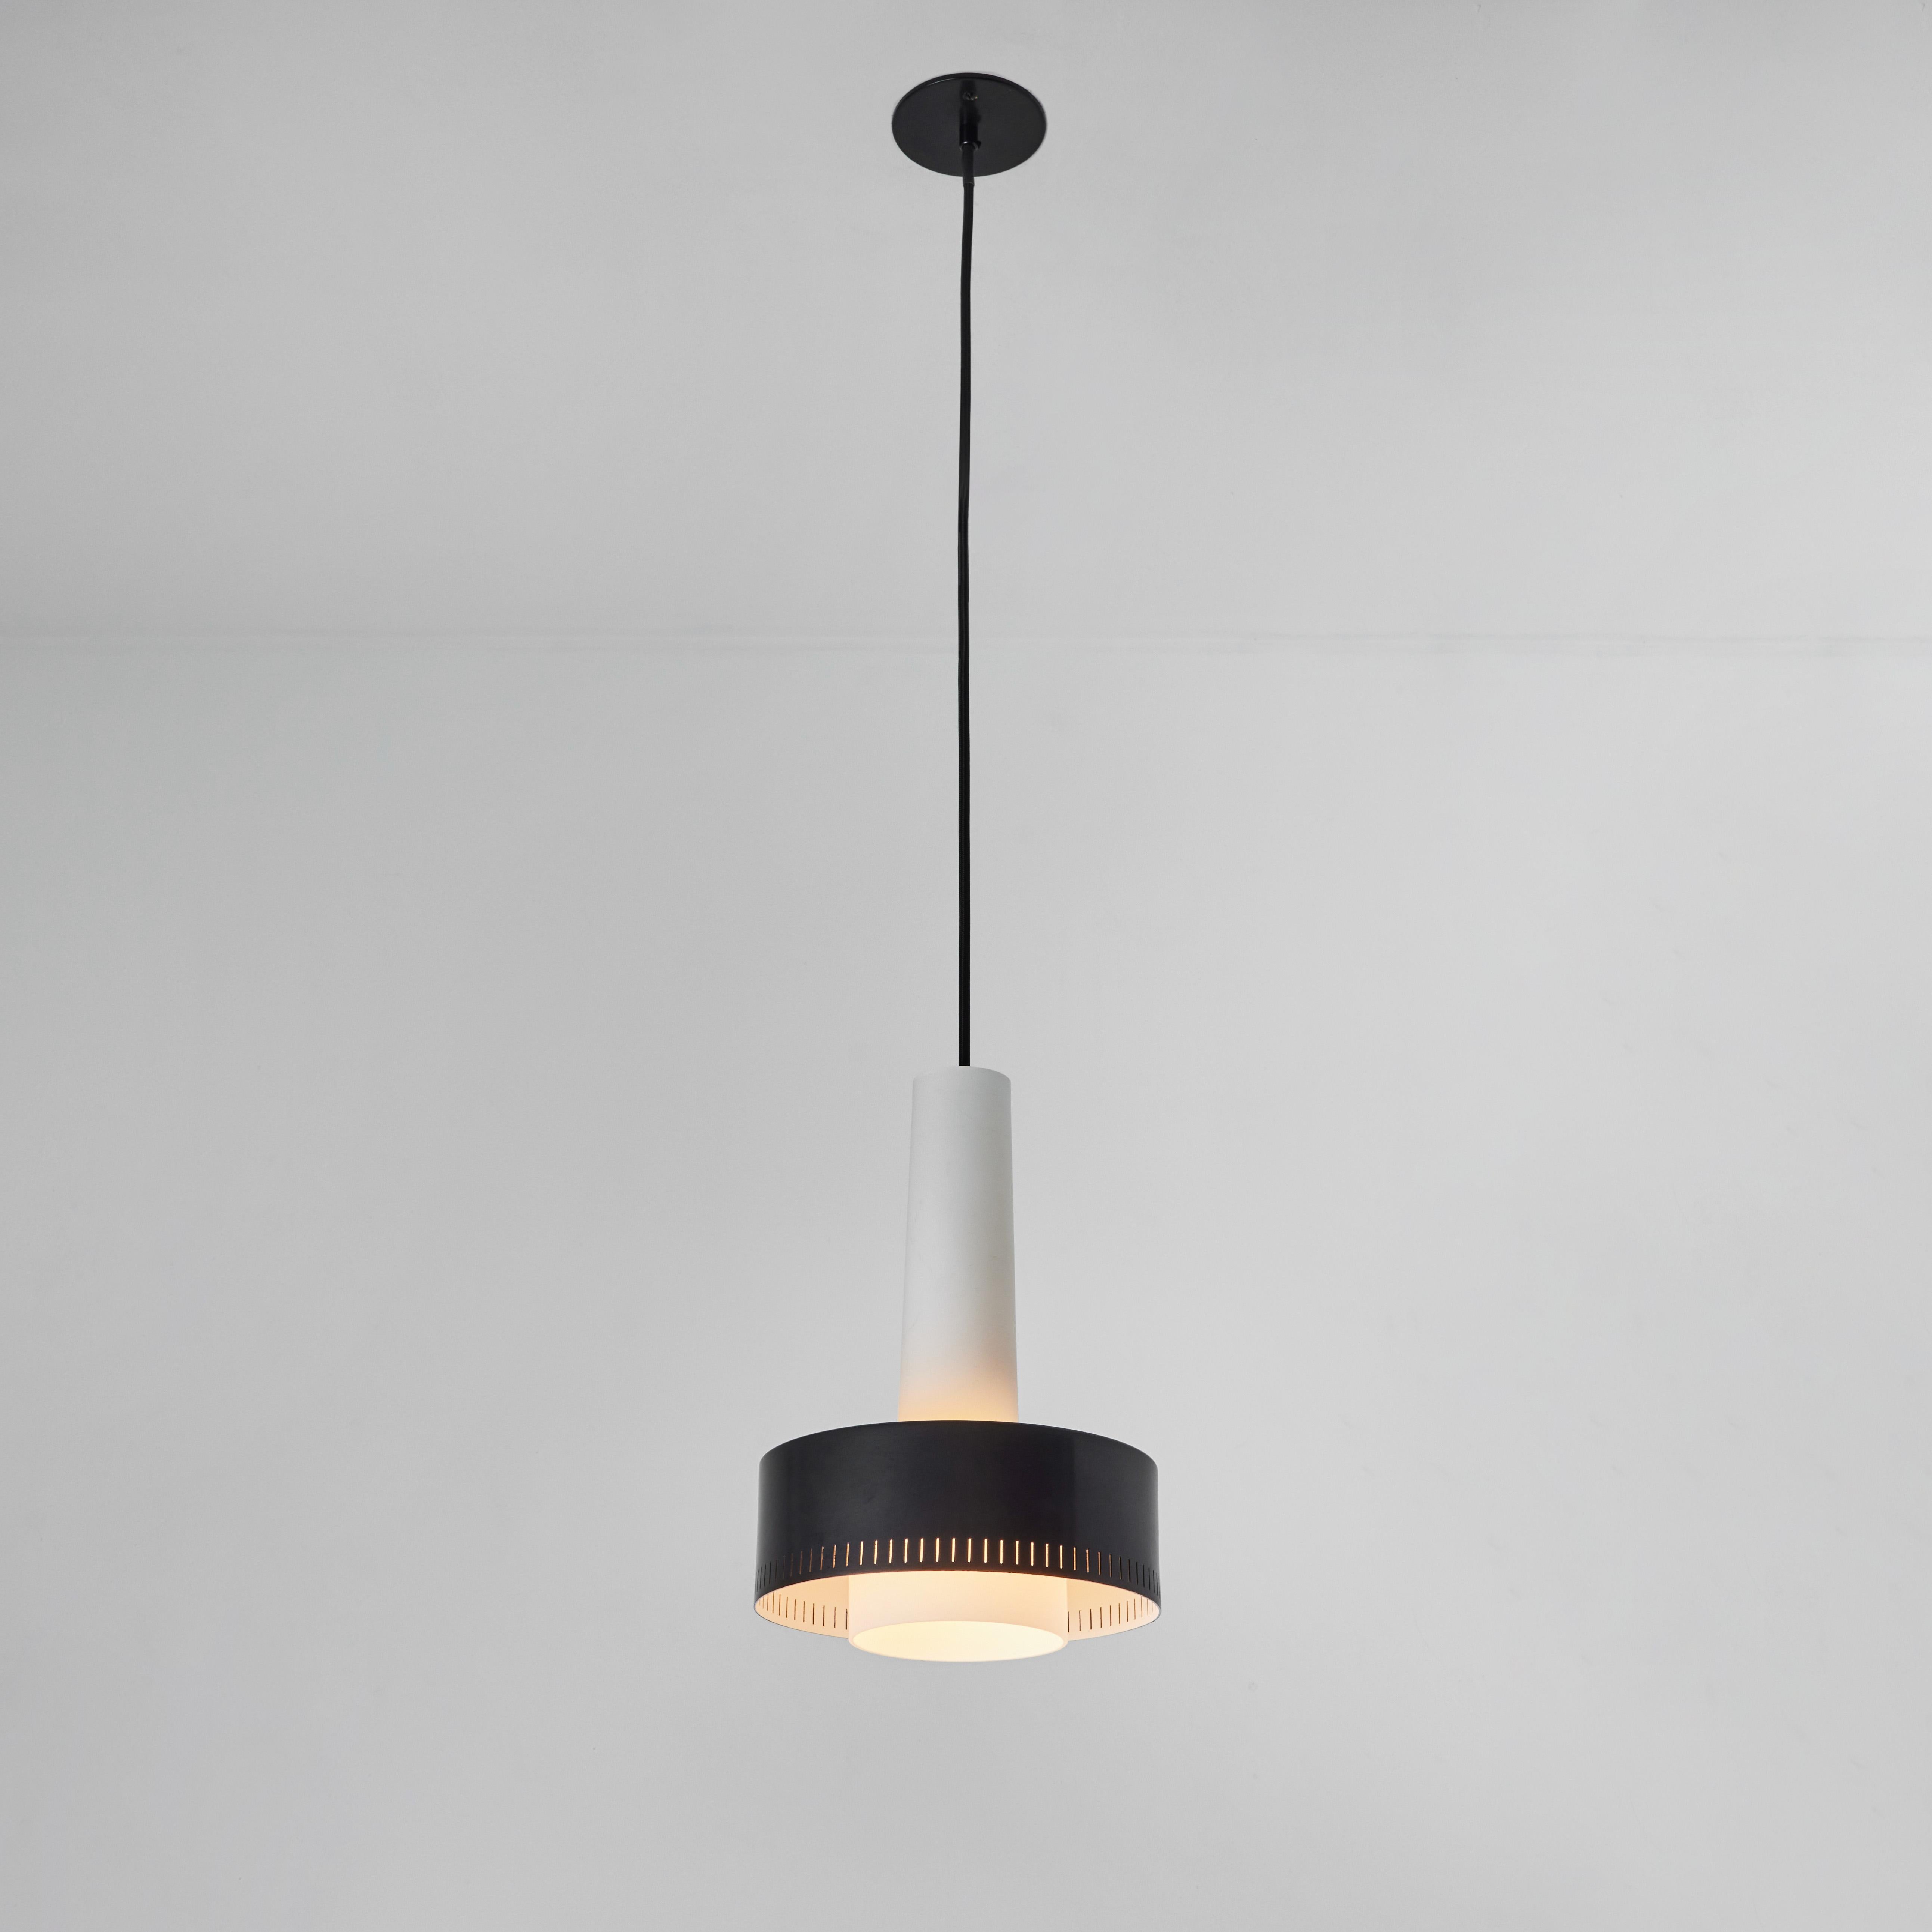 Mid-Century Modern 1950s Glass & Perforated Metal Pendant Attributed to Bruno Gatta for Stilnovo